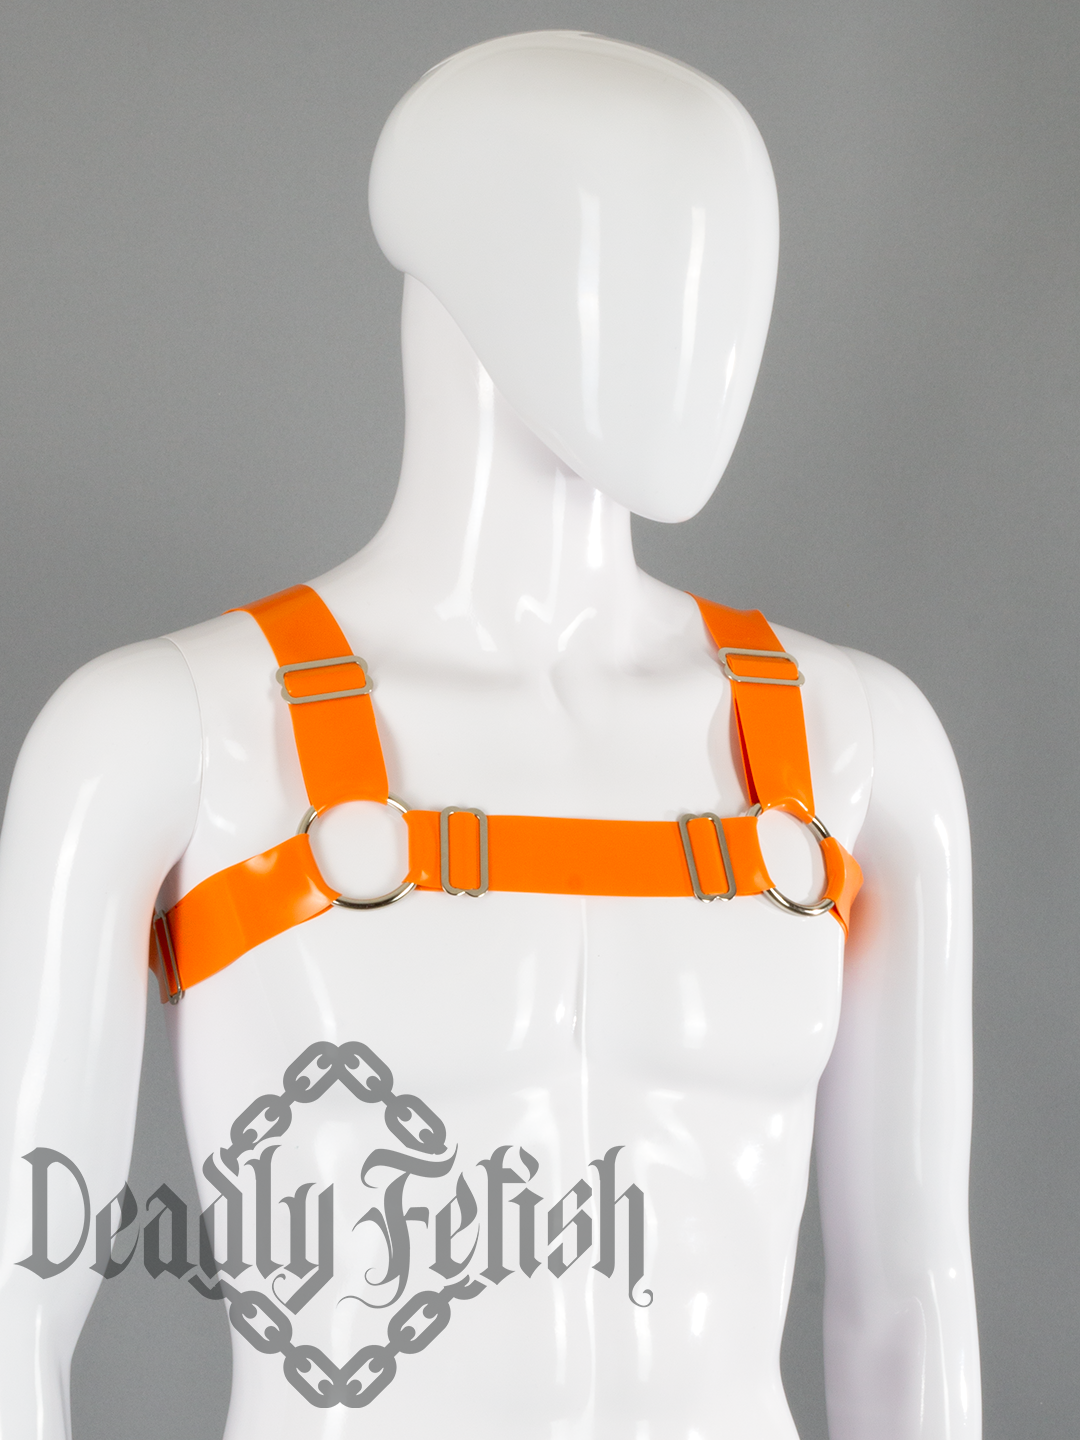 Deadly Fetish Made-to-Order Latex: Basic Harness #26